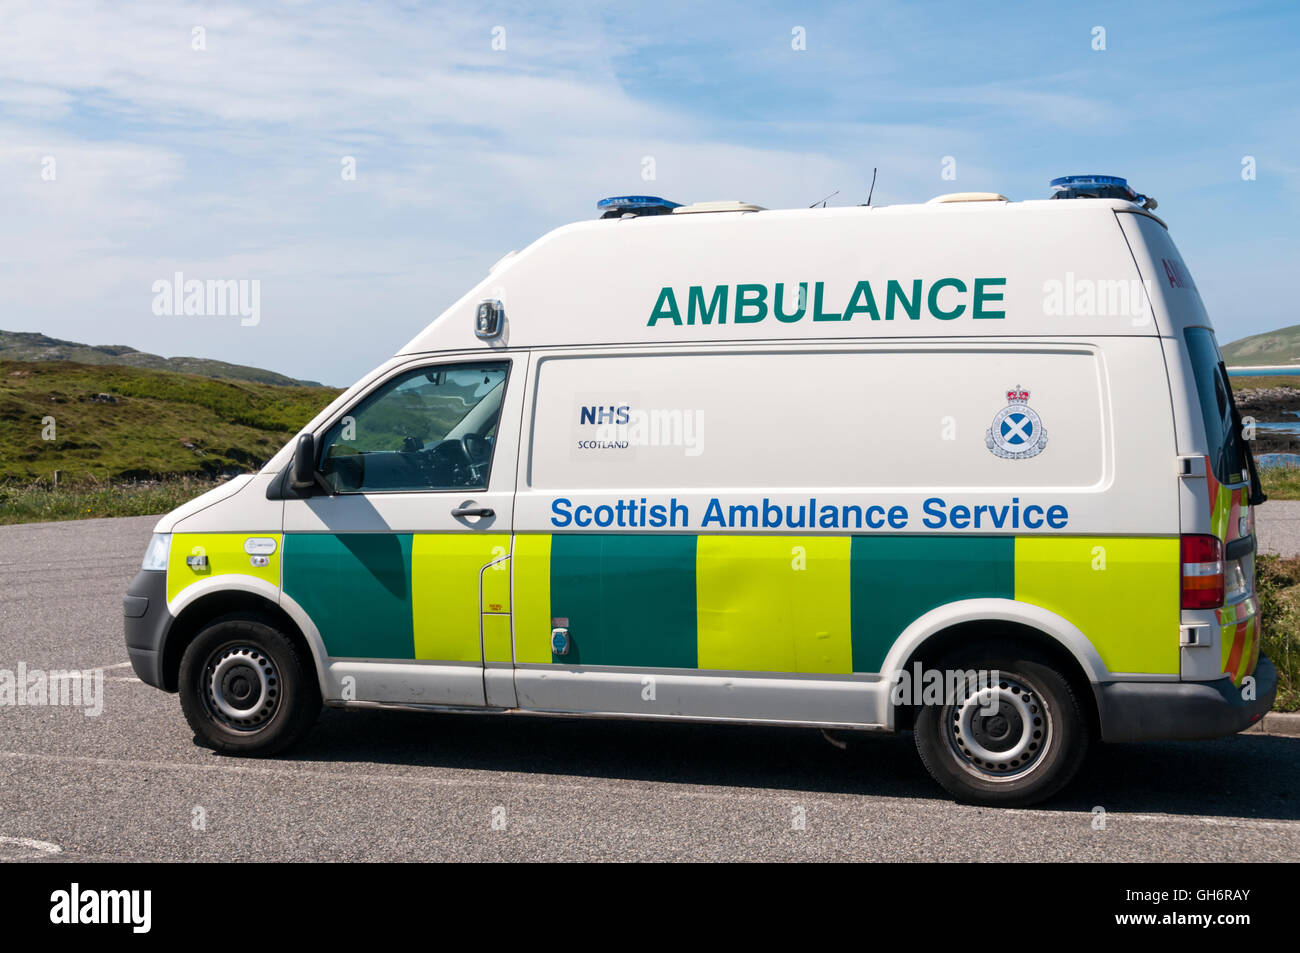 A NHS Scotland ambulance of the Scottish Ambulance Service on the island of Barra in the Outer Hebrides. Stock Photo